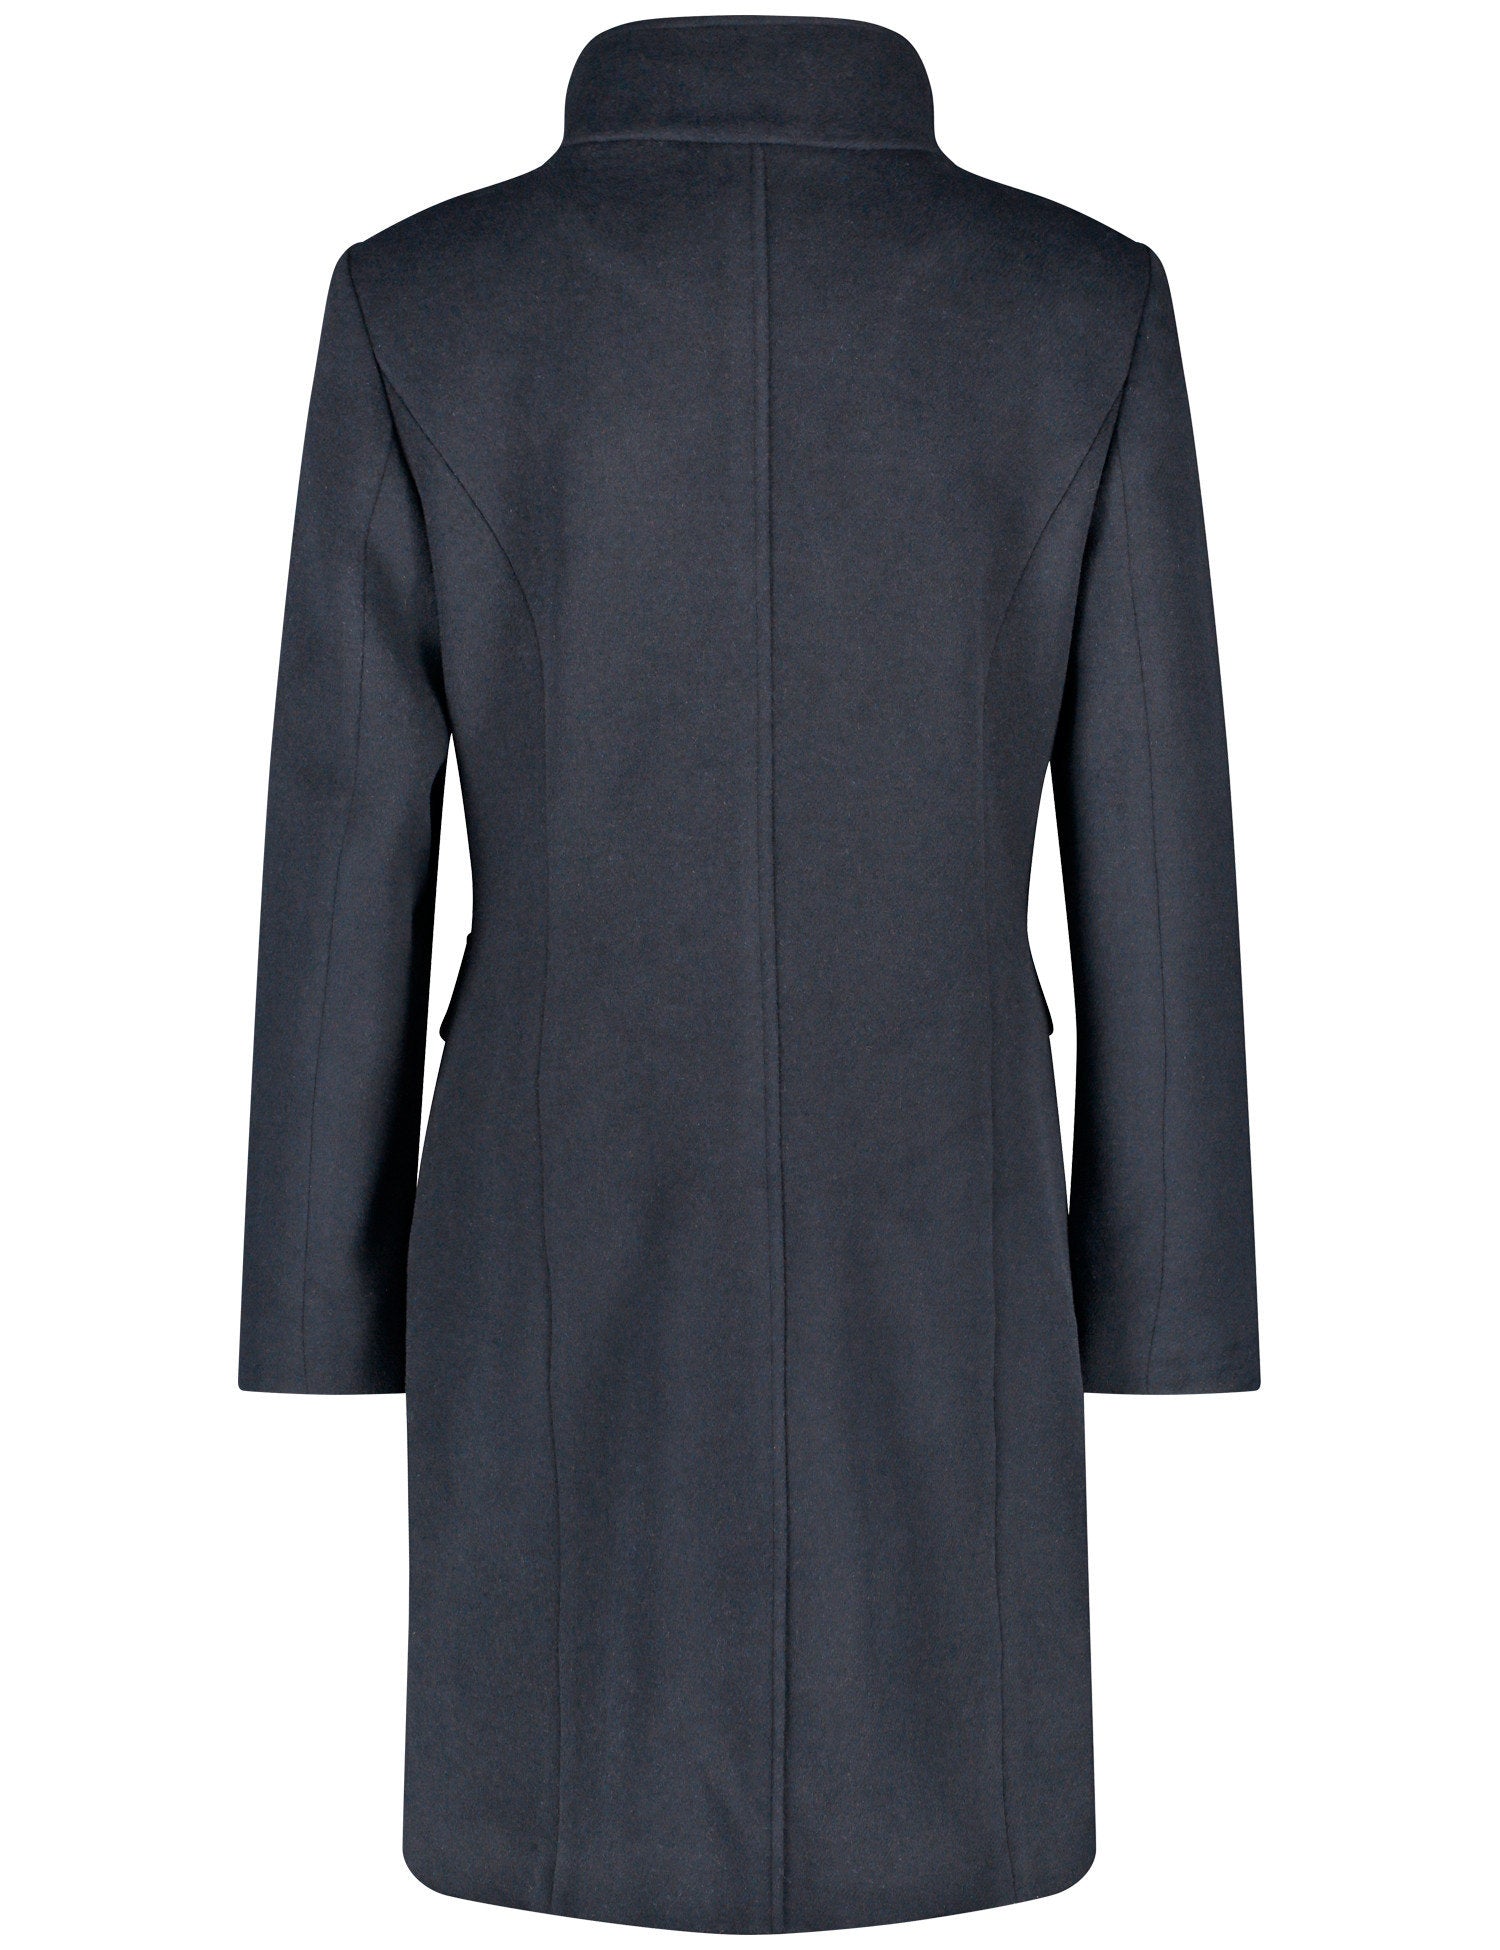 Short Wool Coat With A Stand Up Collar_250235-31131_80880_03